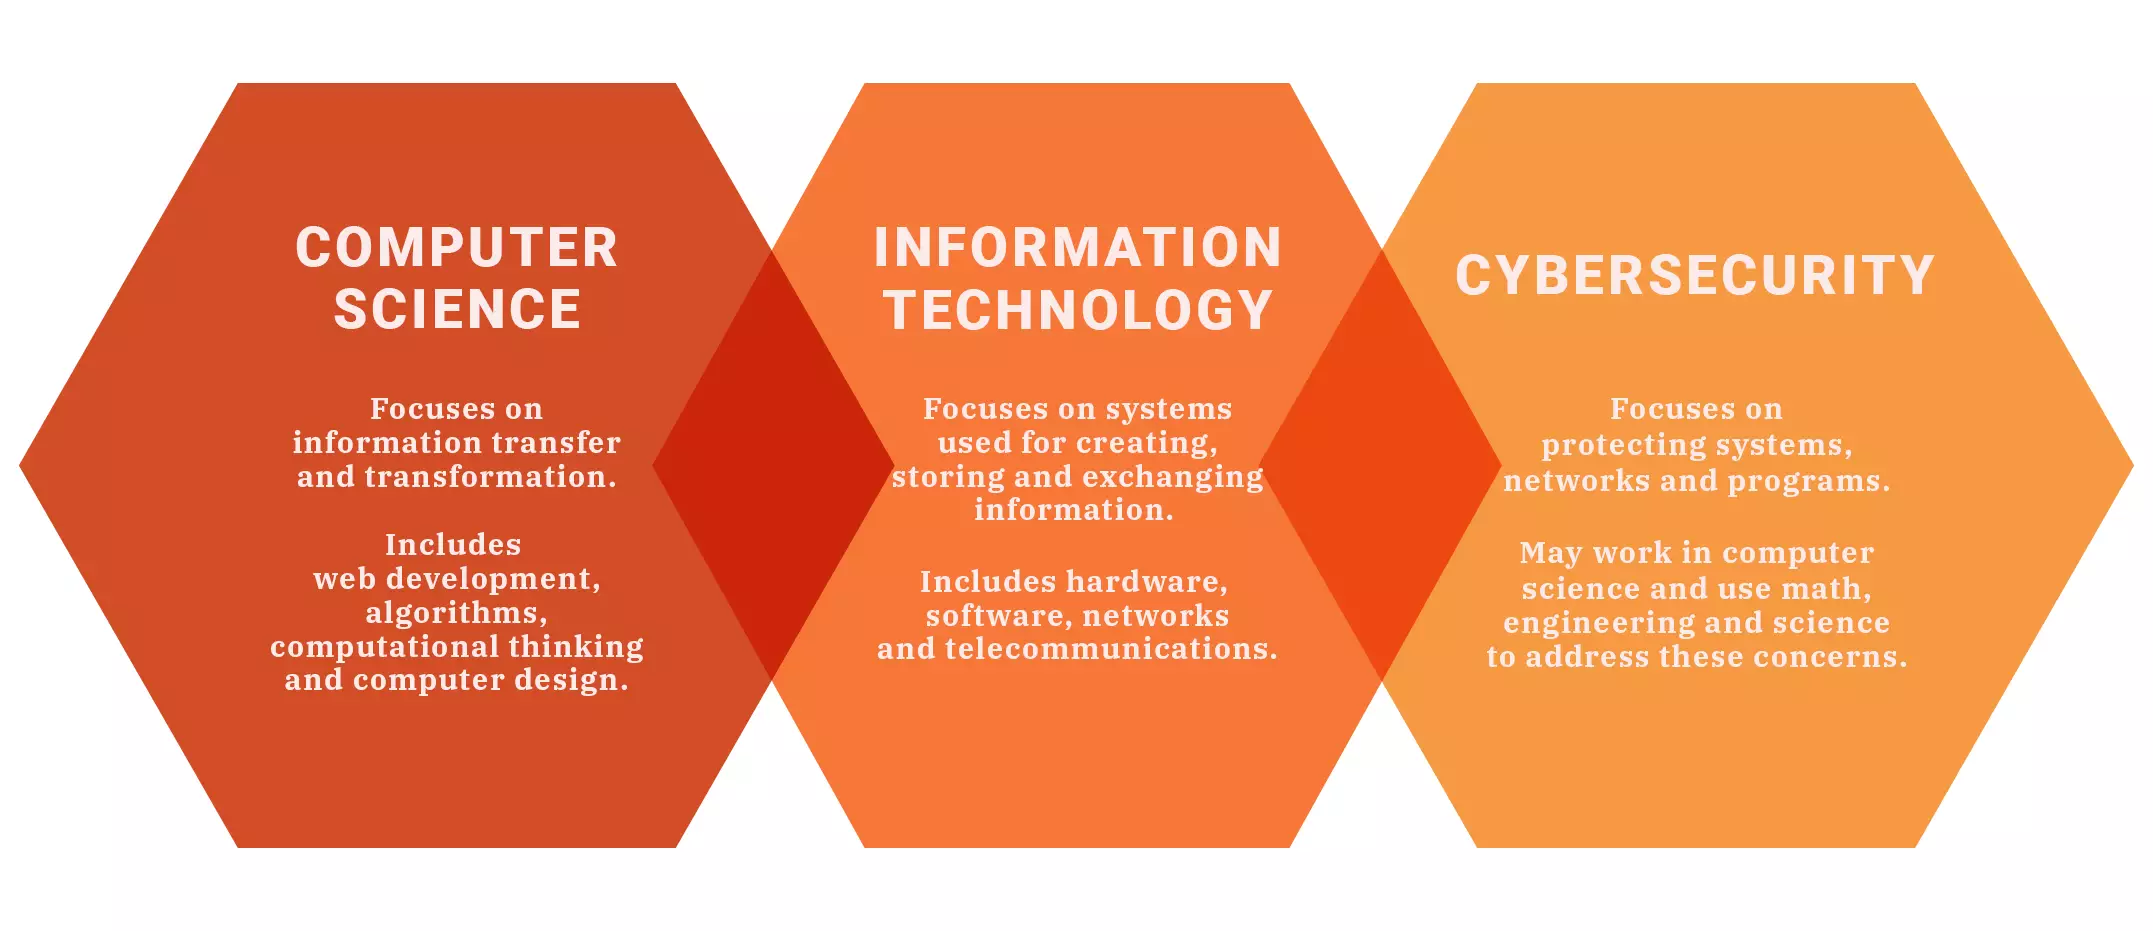 Infographic on differences between computer science, information technology and cybersecurity